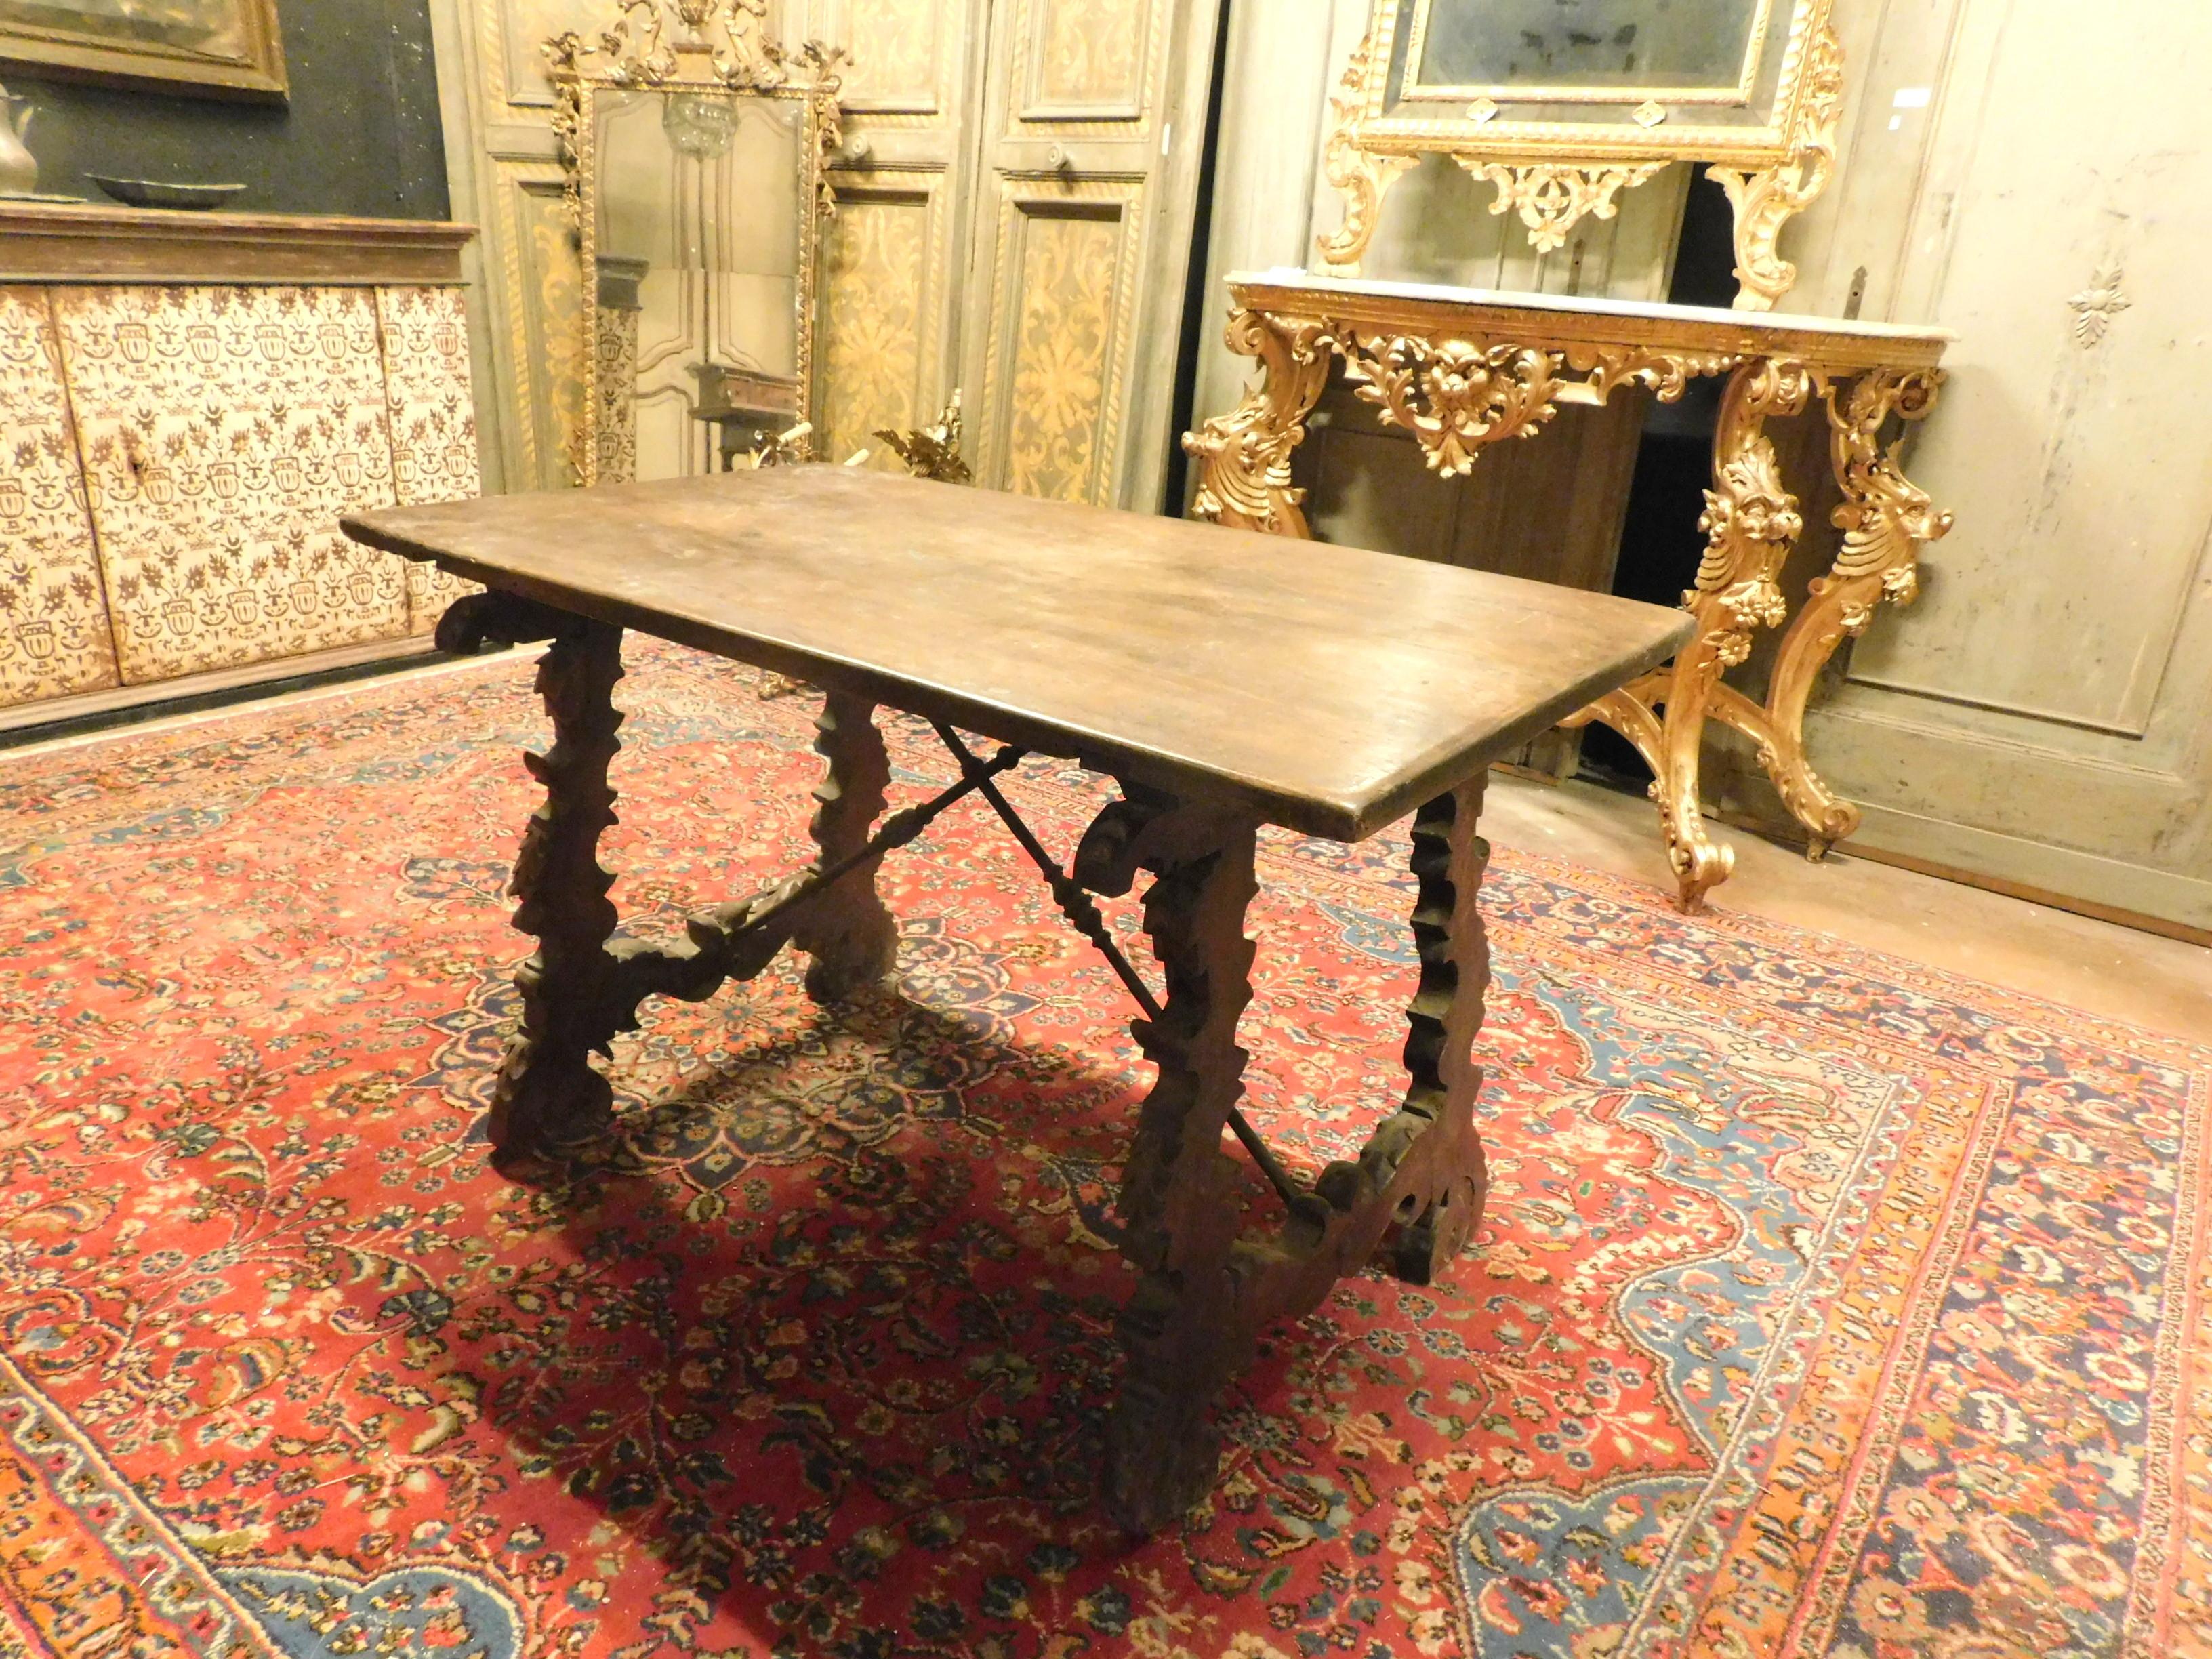 Antique walnut refectory table, original single plank, sculpted wavy legs and original irons, great antiquarian value and valuable construction, all hand built and sculpted in the 18th century in Spain.
Ideal as an antique dining table, or as a